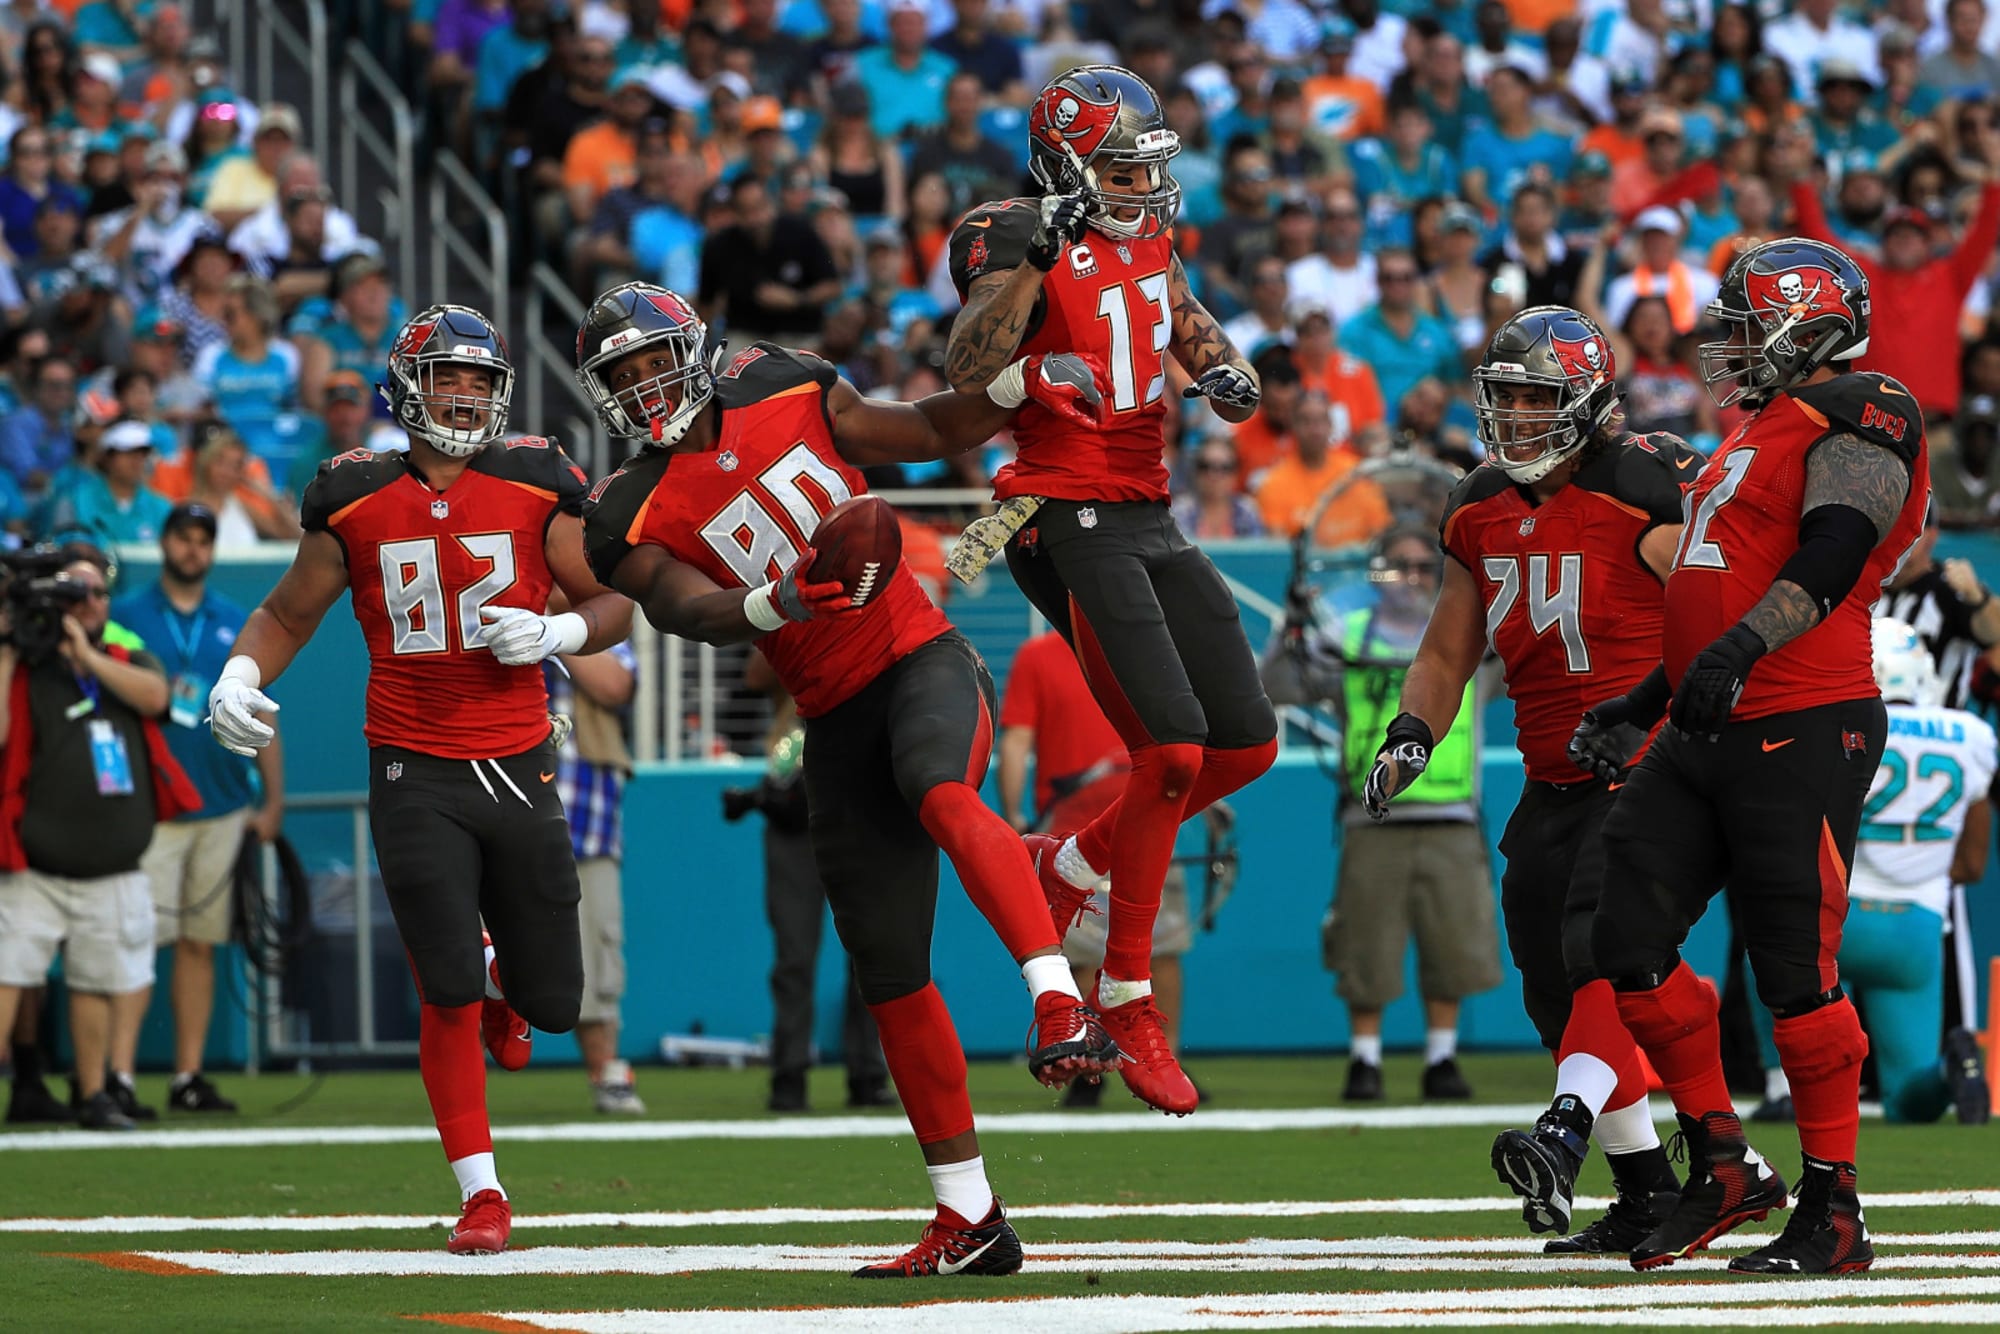 Tampa Bay Buccaneers: Top 5 players currently on the roster